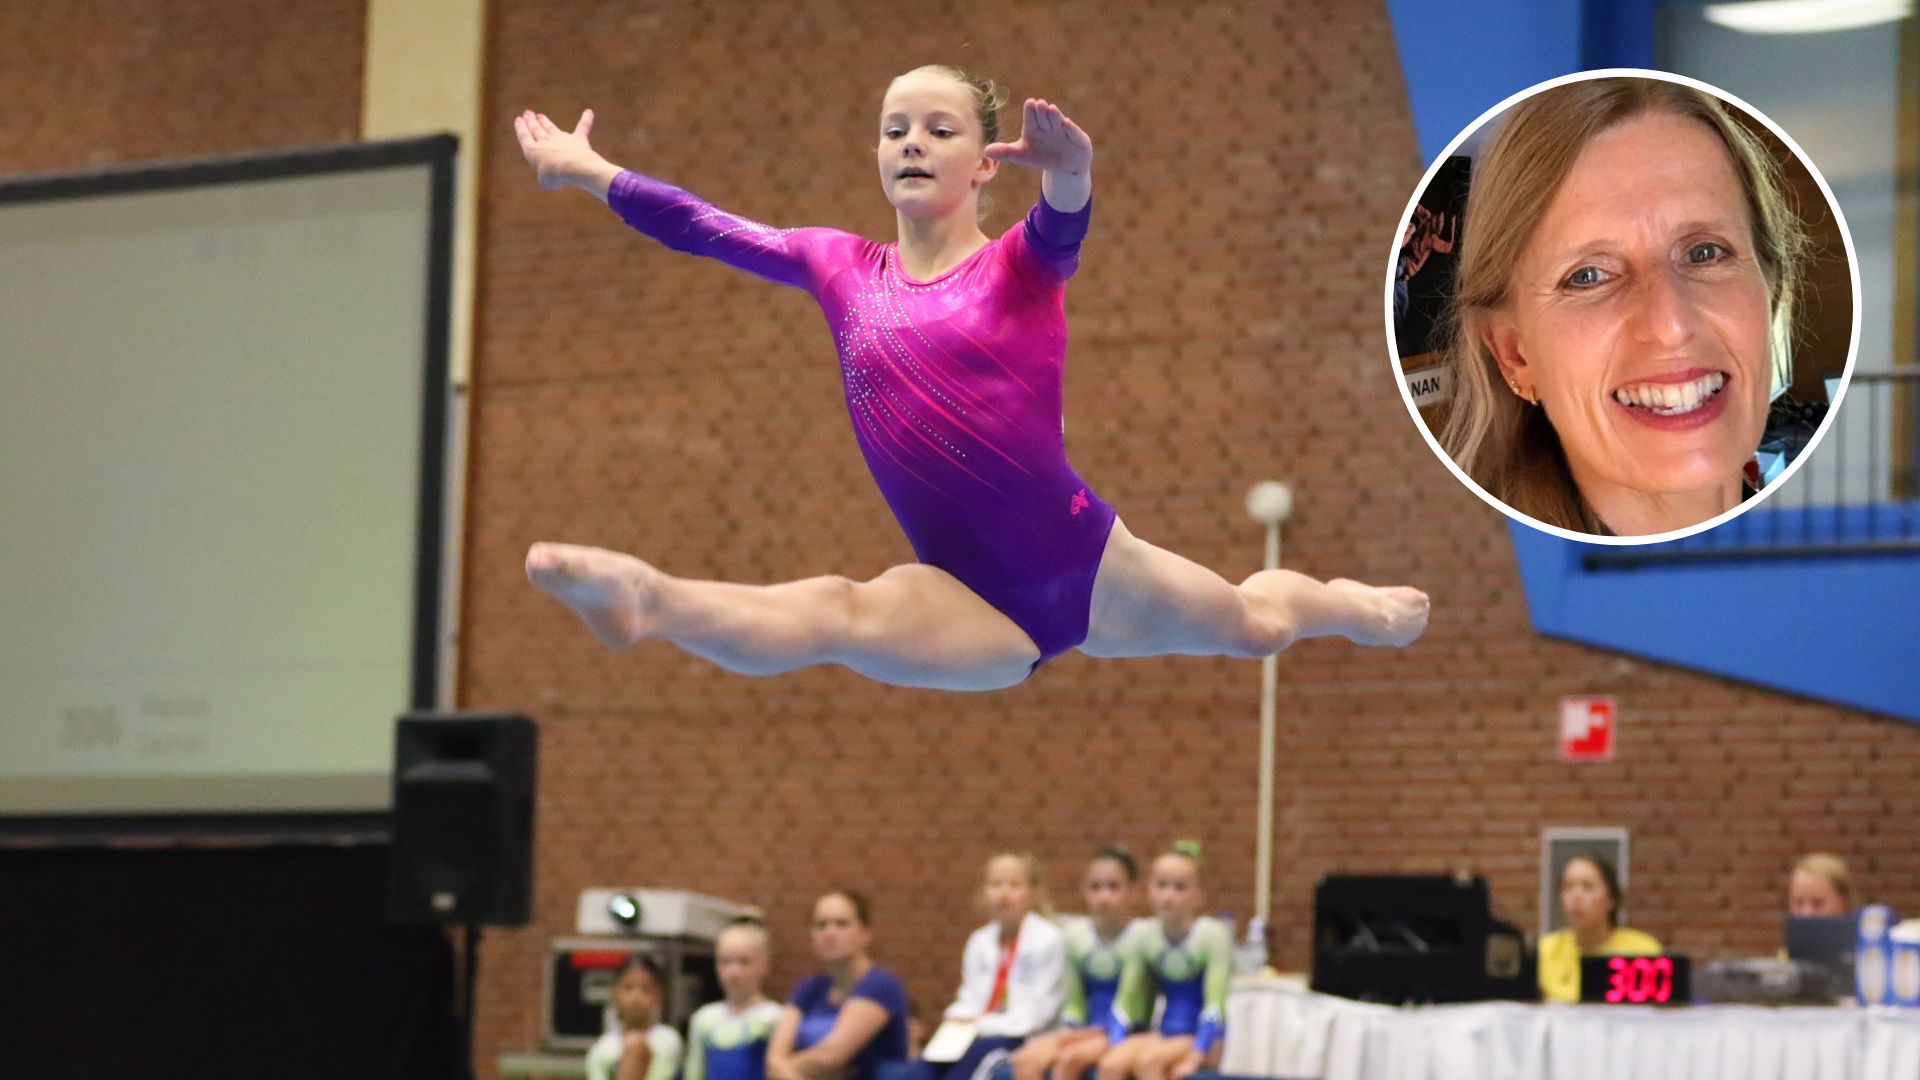 NZ gymnasts can now wear shorts over their leotards – why is this a big deal for female athletes? 